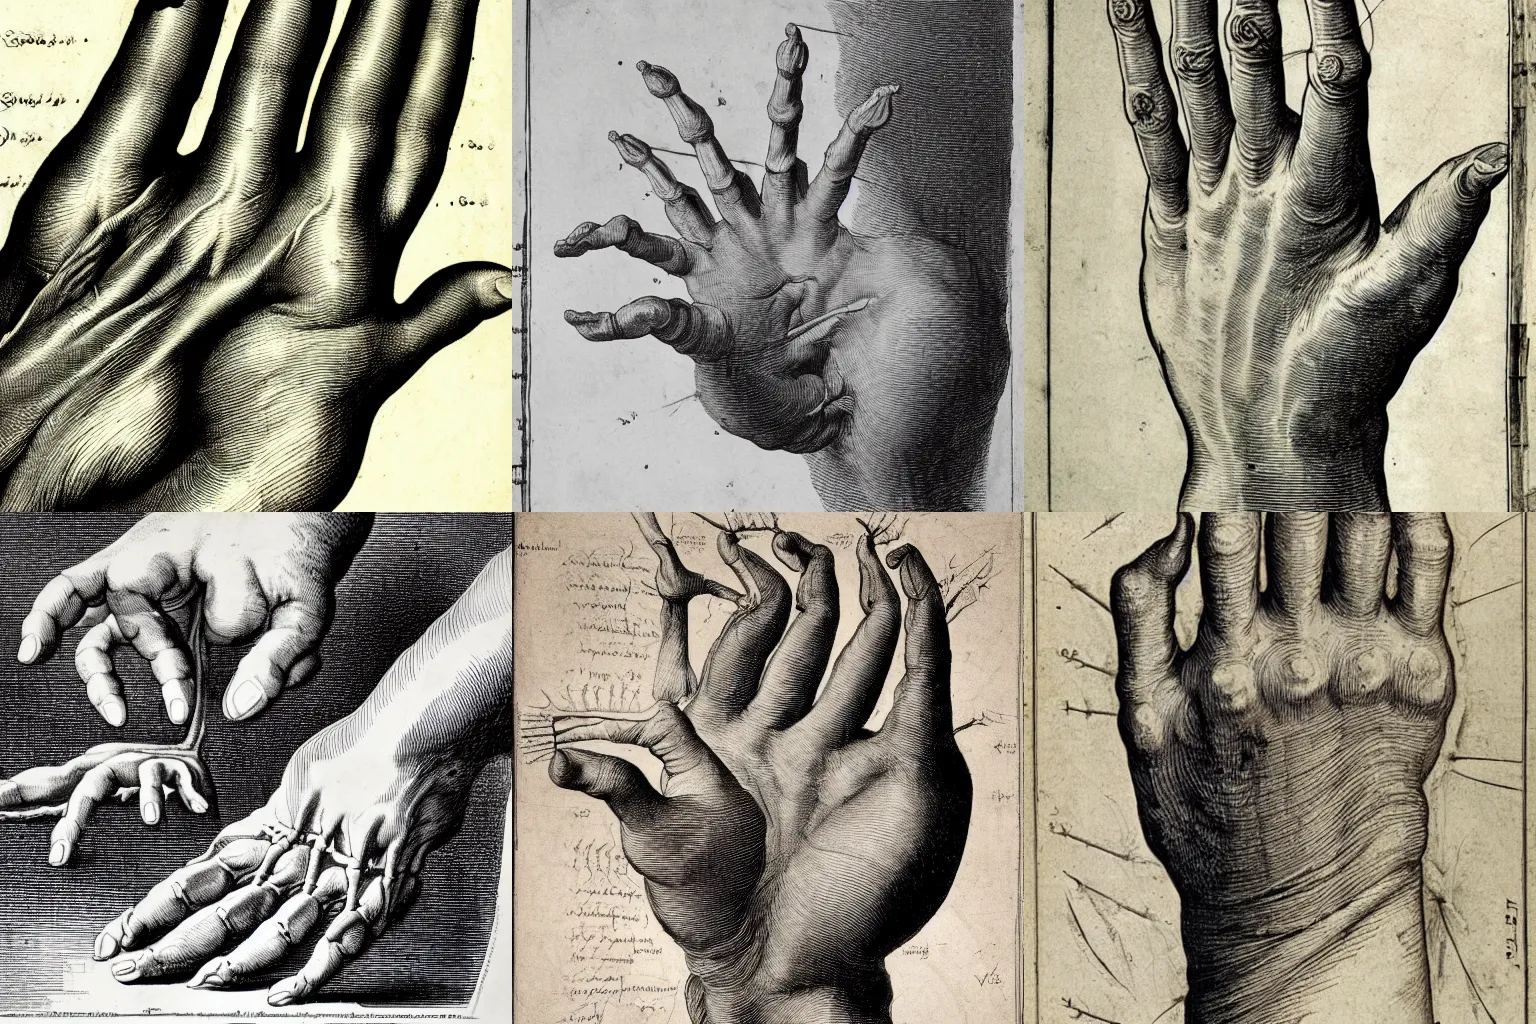 Prompt: Vesalius engraving, detailed diagram of the tendons and musculature of the hand, close up